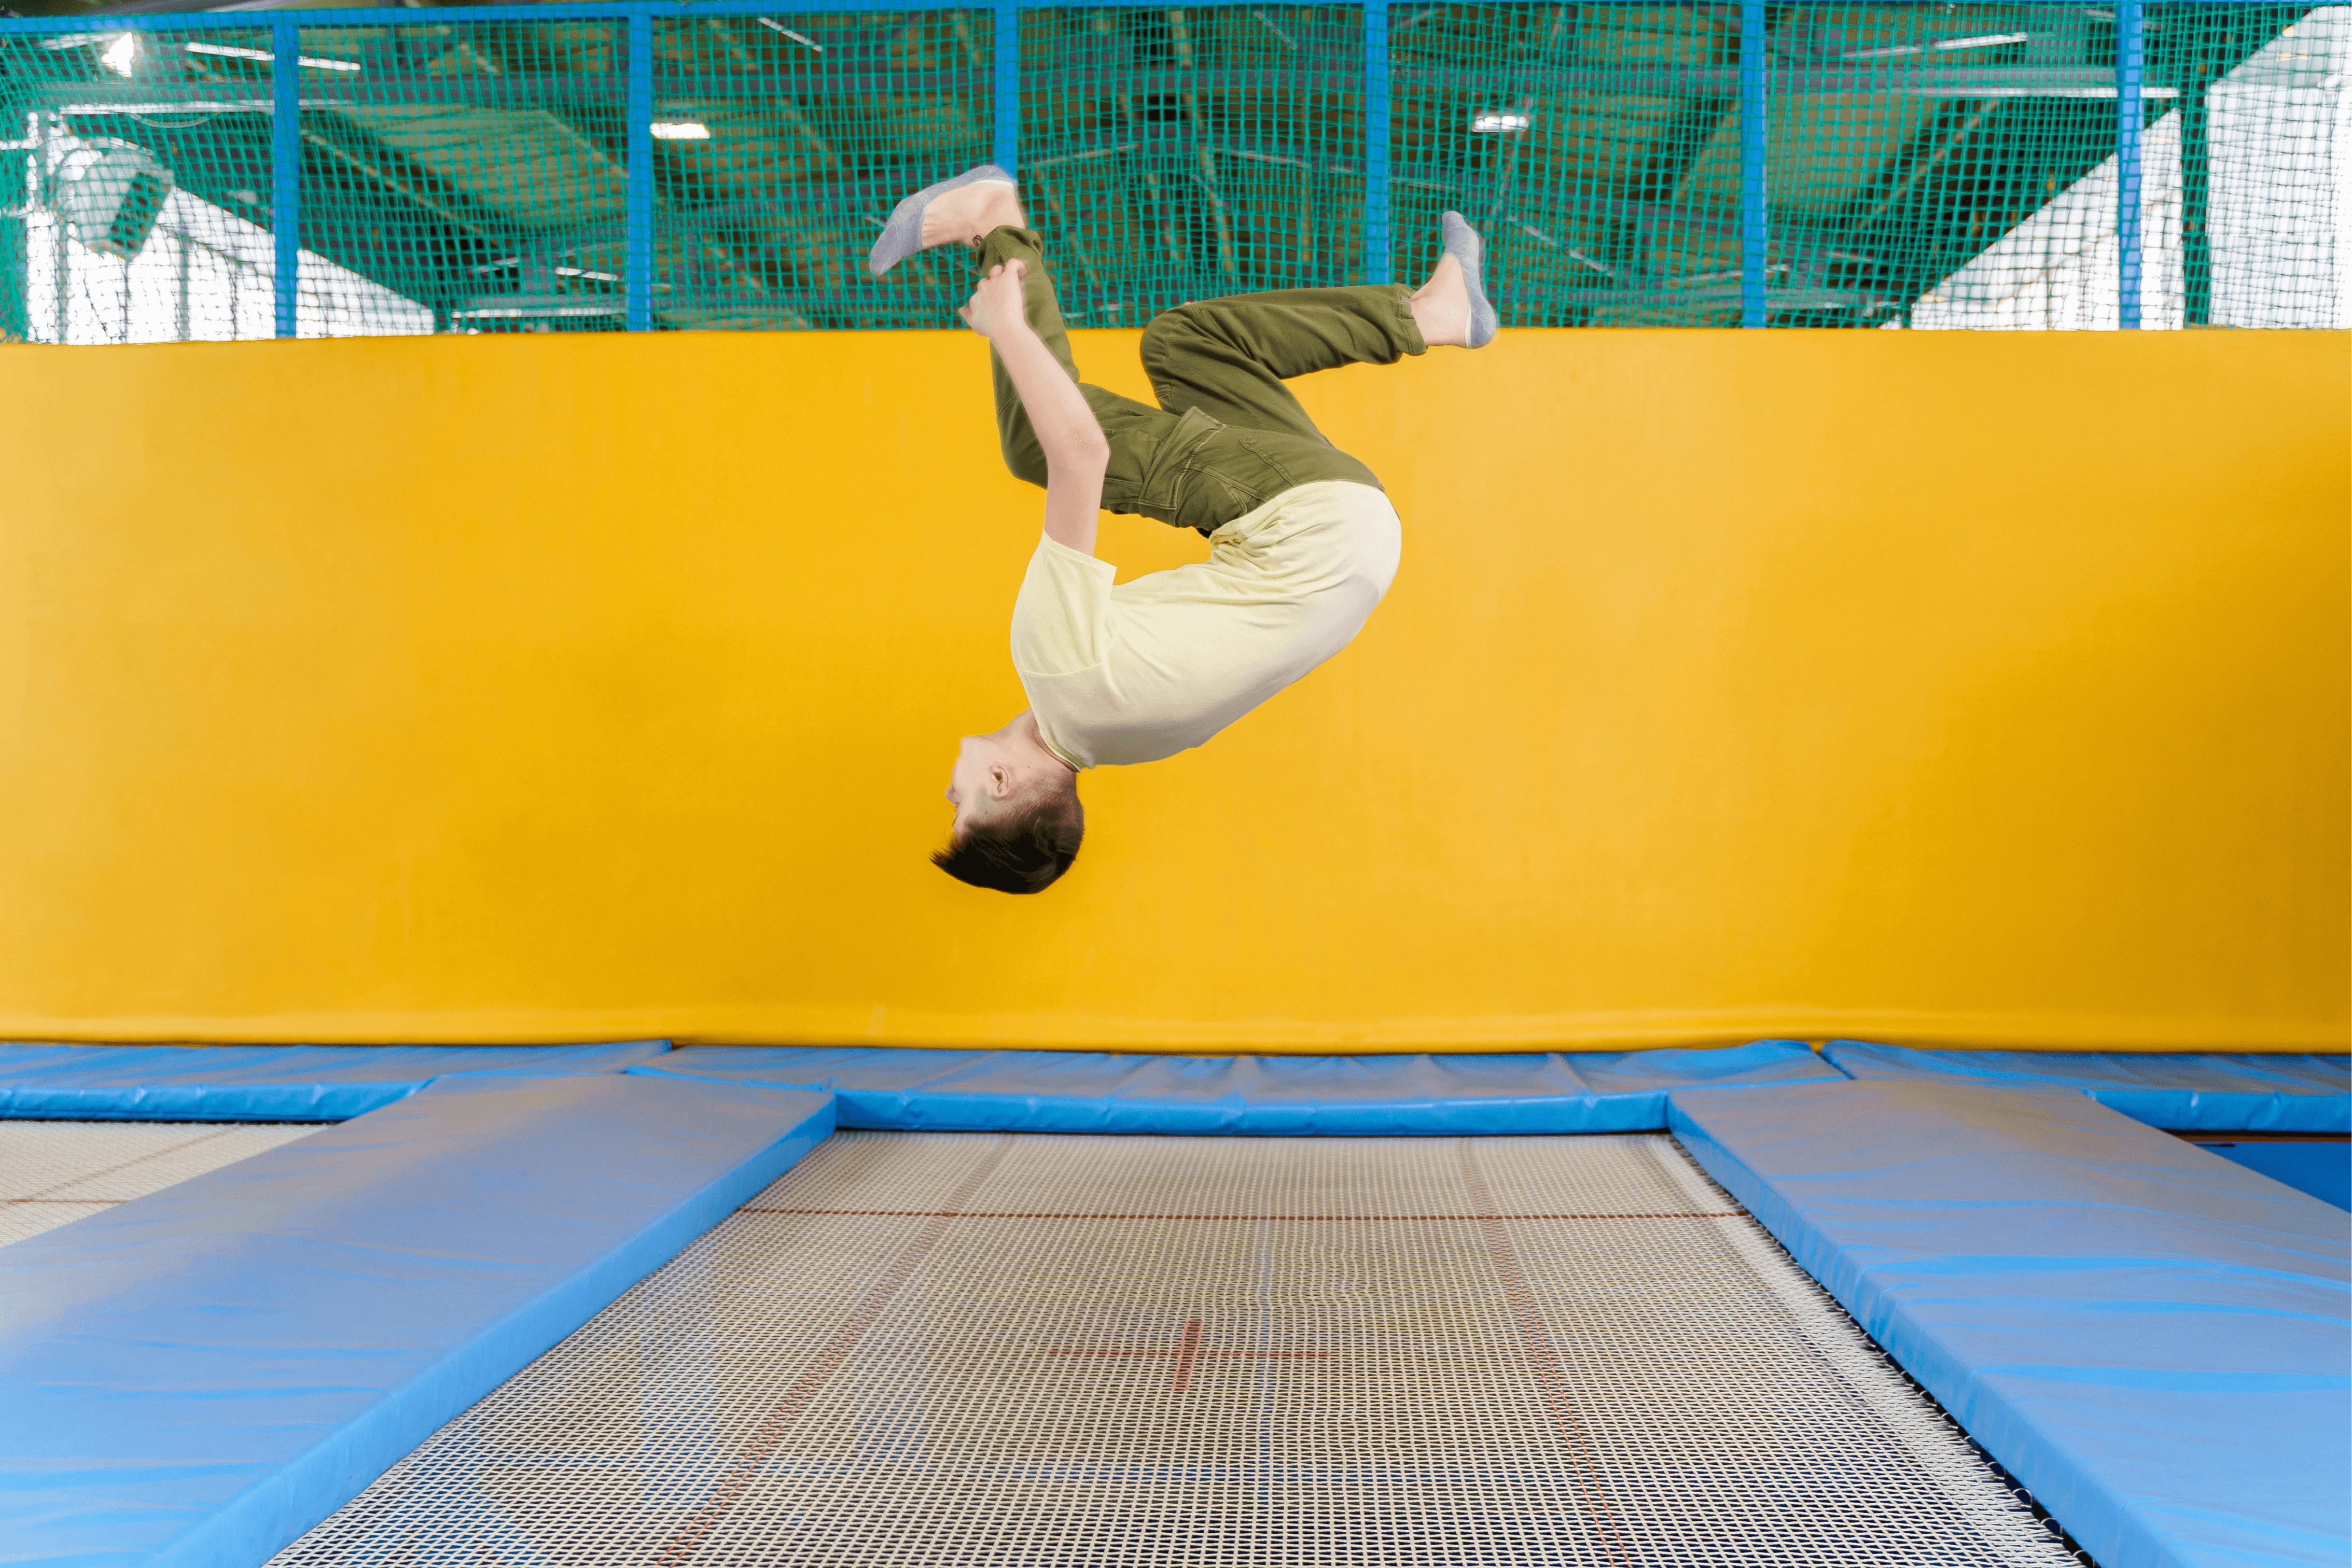 5 of the Best Trampoline Parks in London